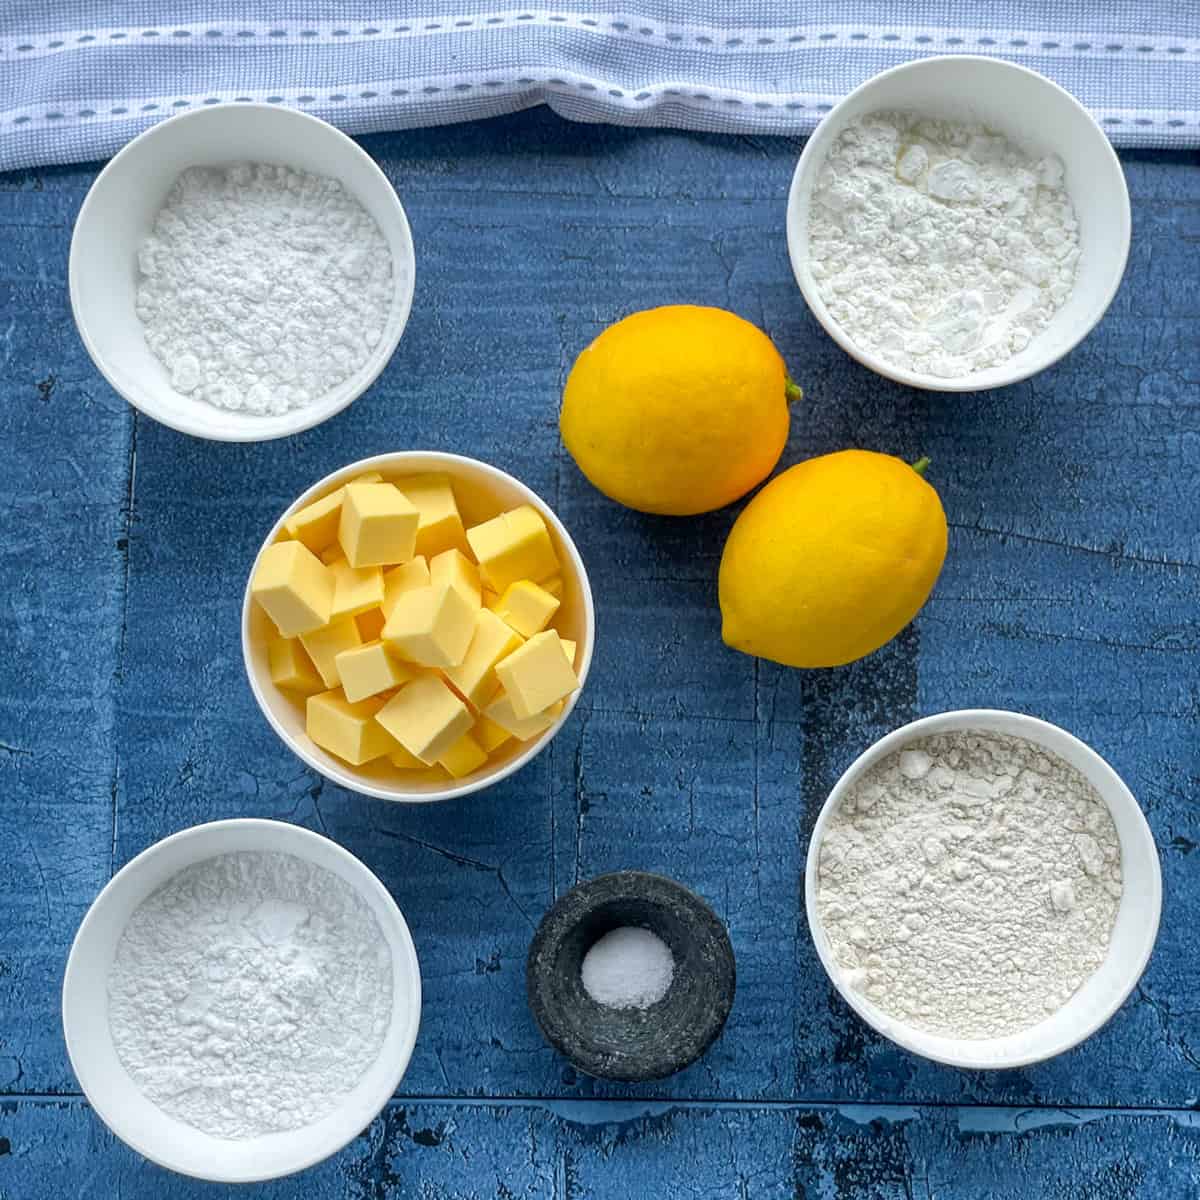 Ingredients used to make lemon shortbread, see recipe card for full details. 